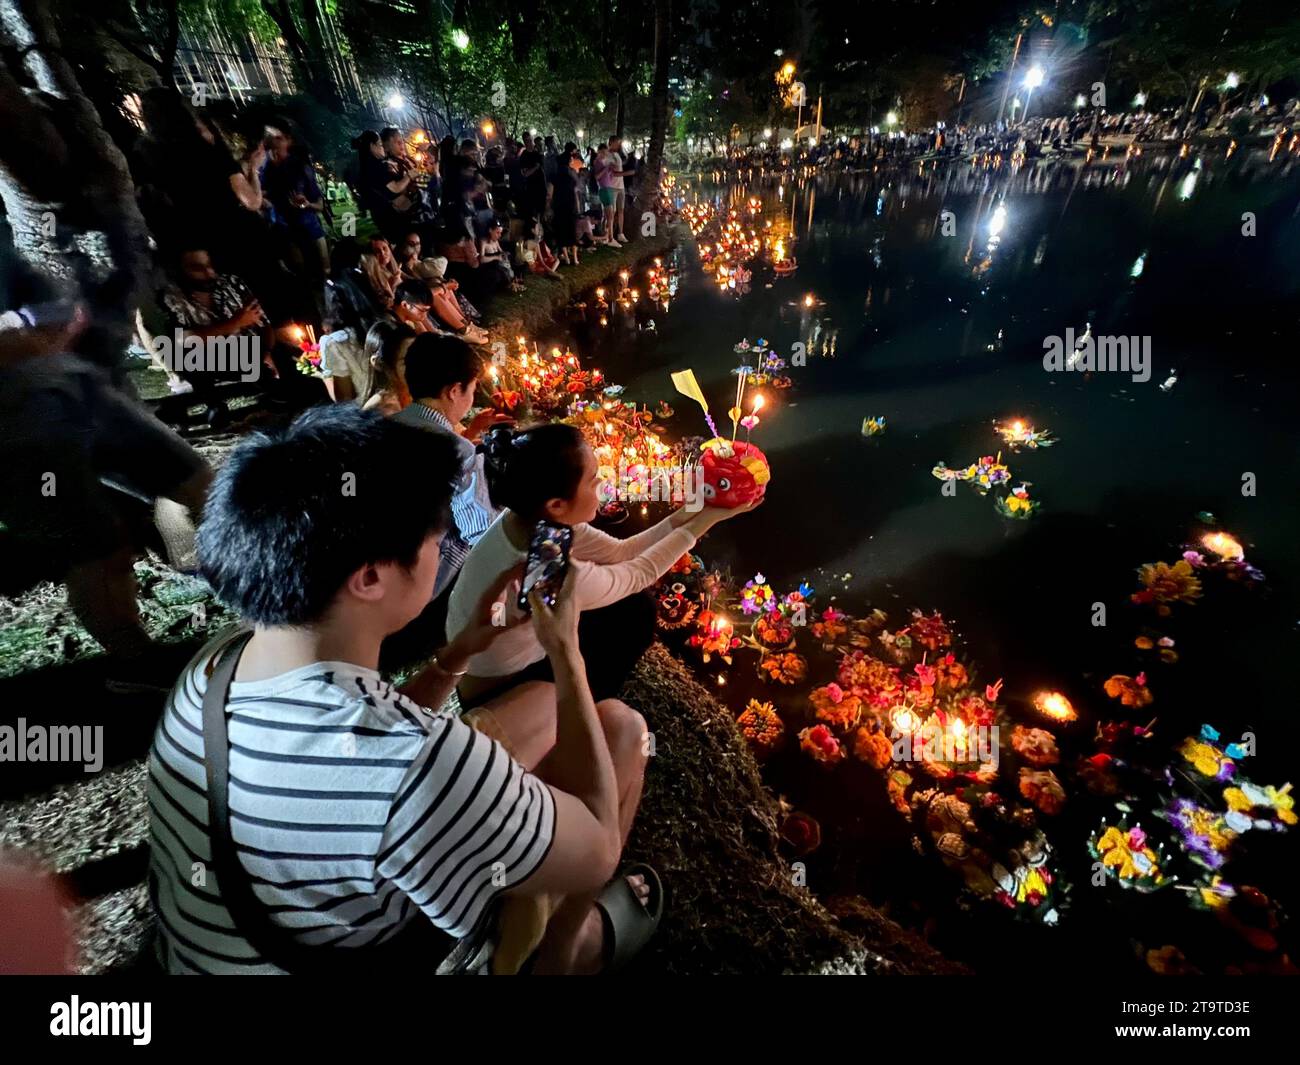 Bangkok, Thailand. 27th Nov, 2023. Thais pray at a lake in Lumphini Park, one of Bangkok's largest parks, before putting their krathong into the water. The small rafts are made of banana trees or expanded polystyrene and are decorated with flowers, incense sticks and candles. Thailand always celebrates the Loi Krathong festival of lights on the day of the full moon in the twelfth month of the traditional calendar. The small rafts are lowered into the water in rivers or lakes to pay homage to the Hindu water goddess Mae Phra Khongkha. Credit: Carola Frentzen/dpa/Alamy Live News Stock Photo